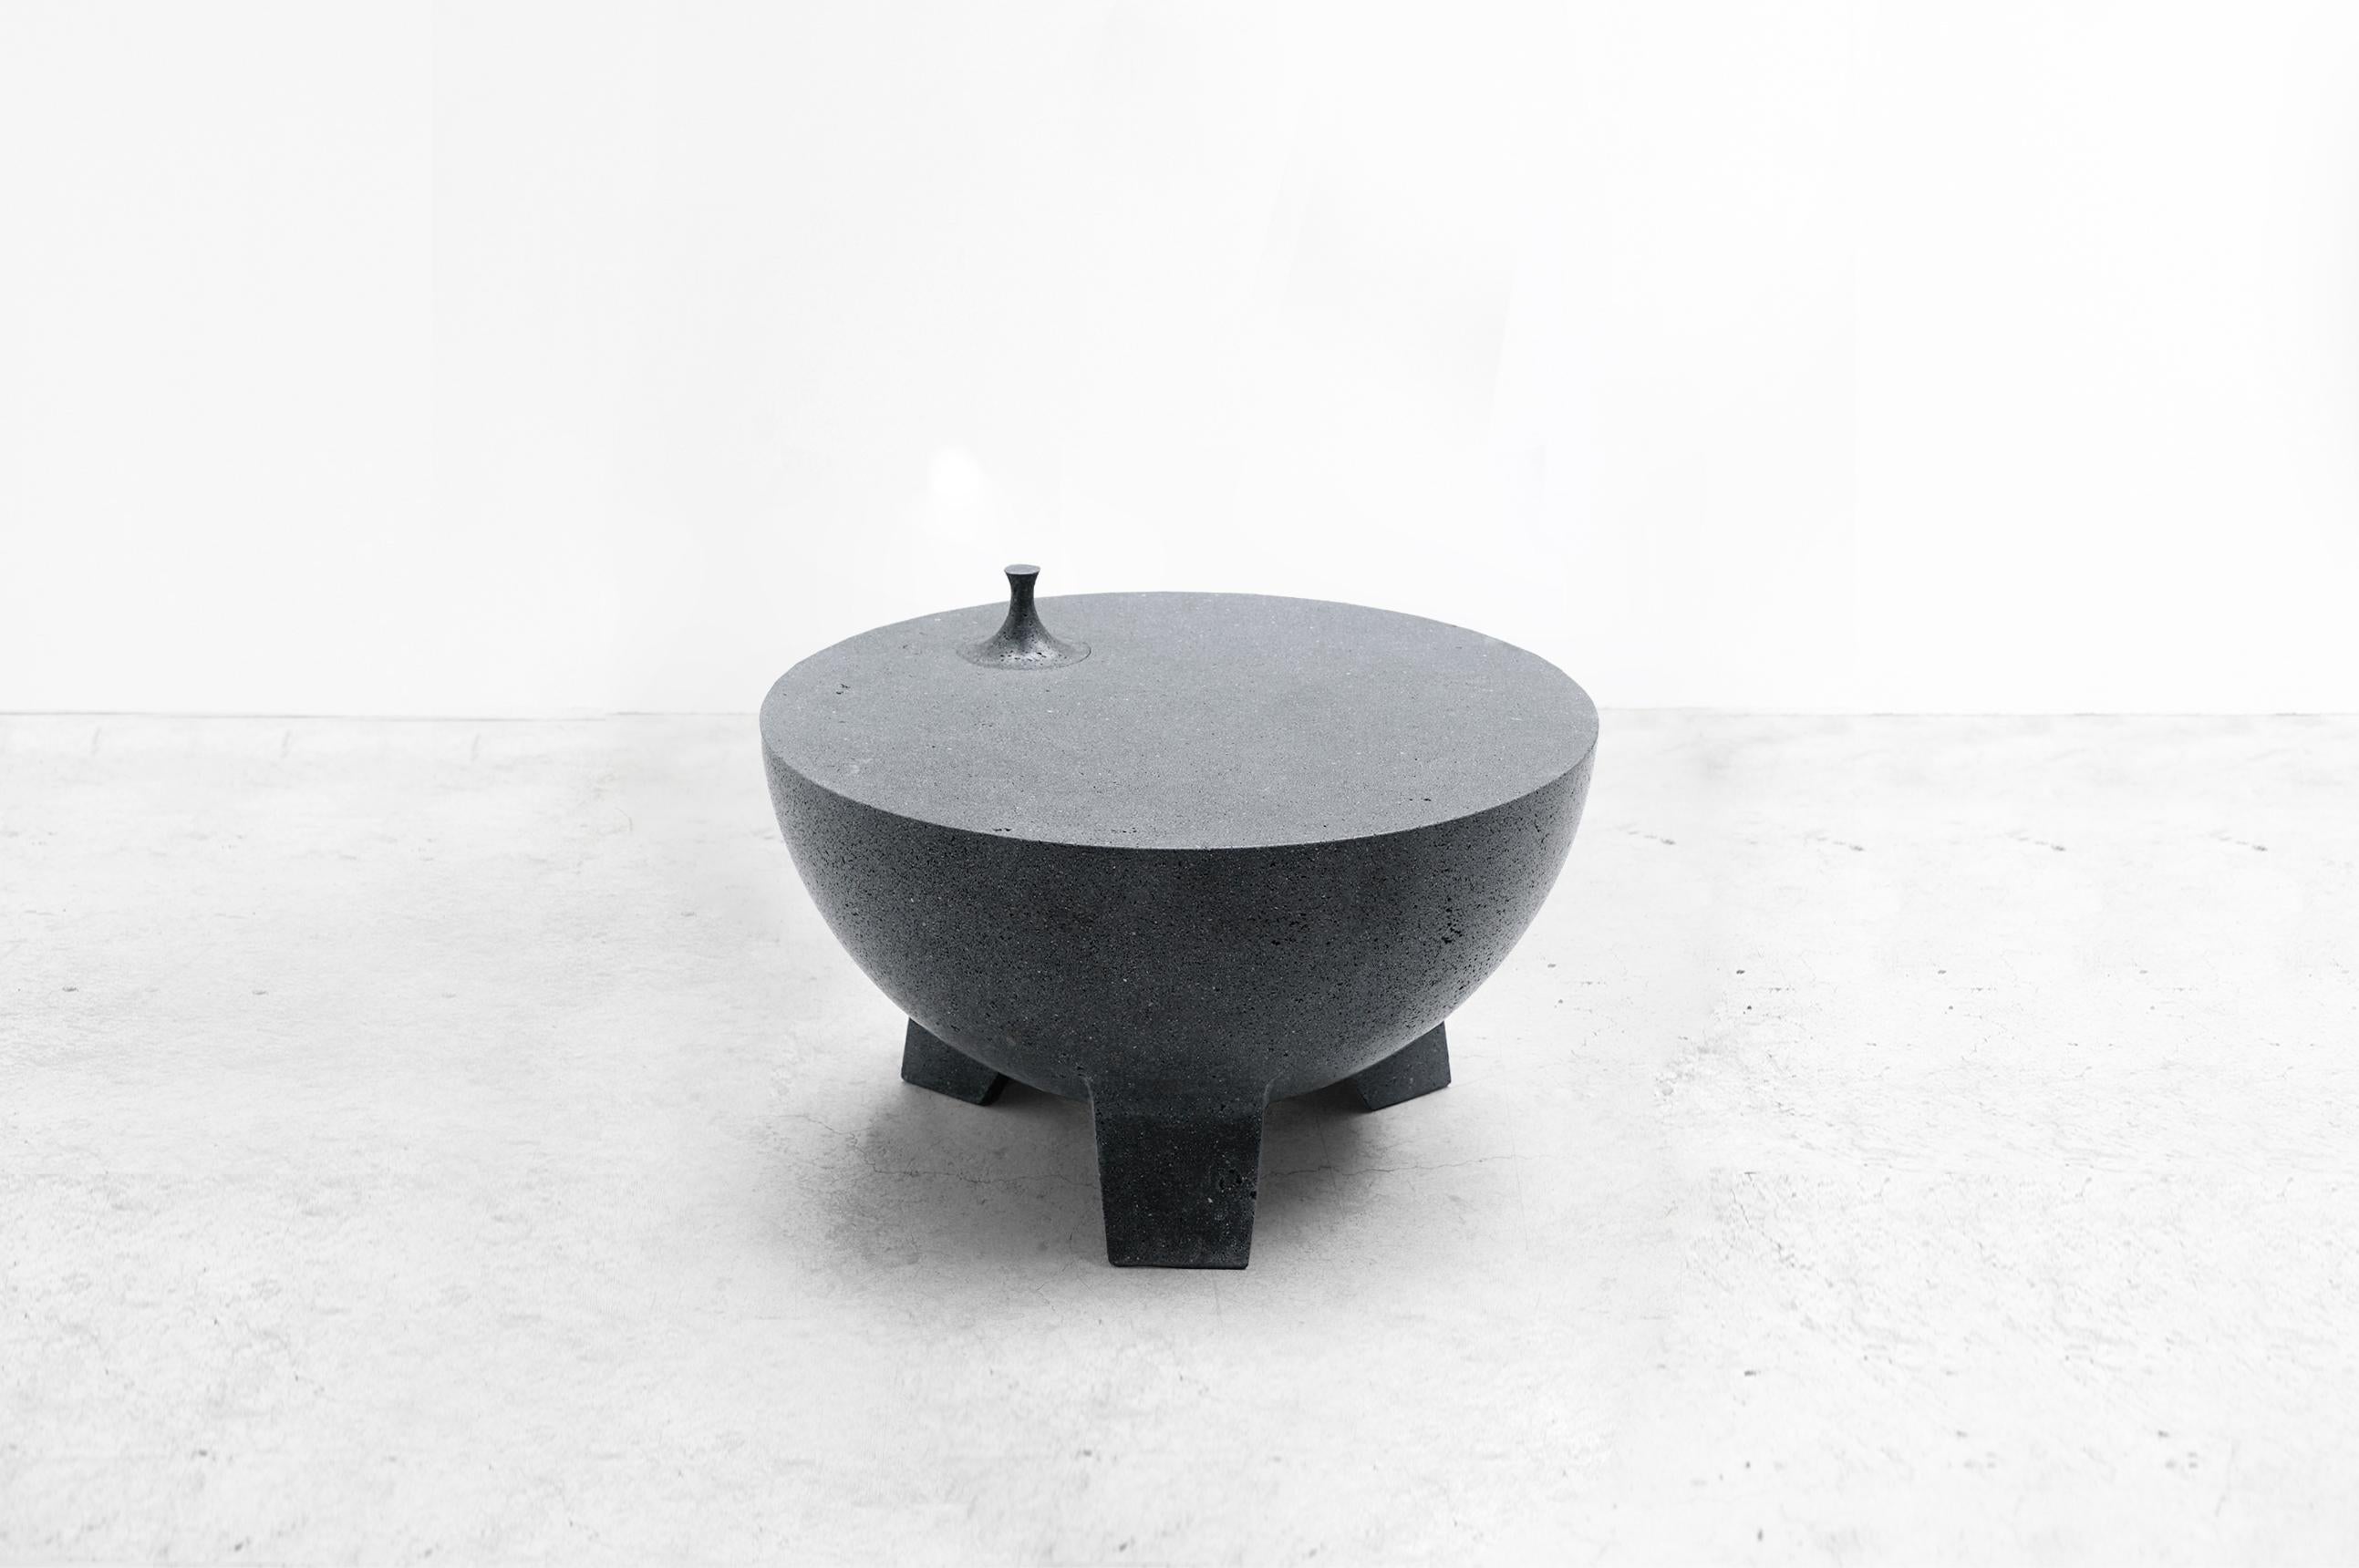 Molcajete Table (Mortar Table)
From Series Tripod
Manufactured by Pedro Reyes
Produced Exclusively for Side Gallery
Mexico, 2018
Volcanic stone.